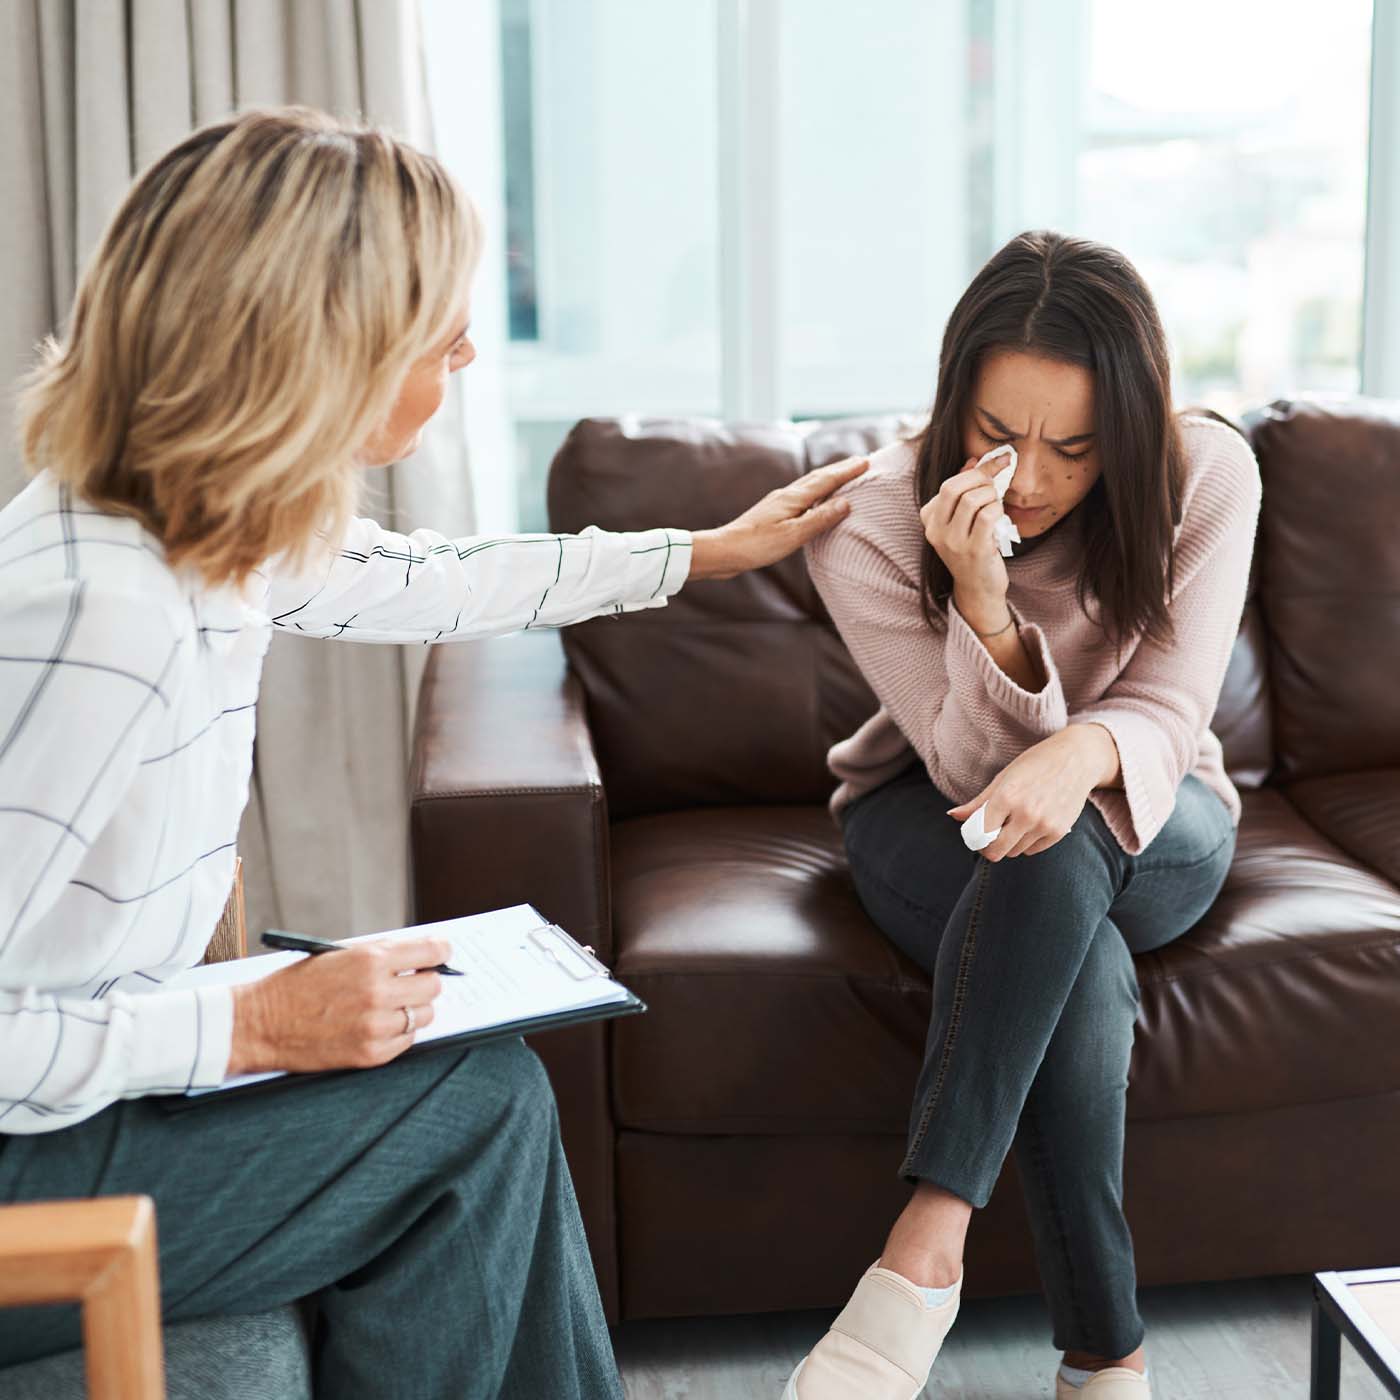 counselor working with young lady in home environment